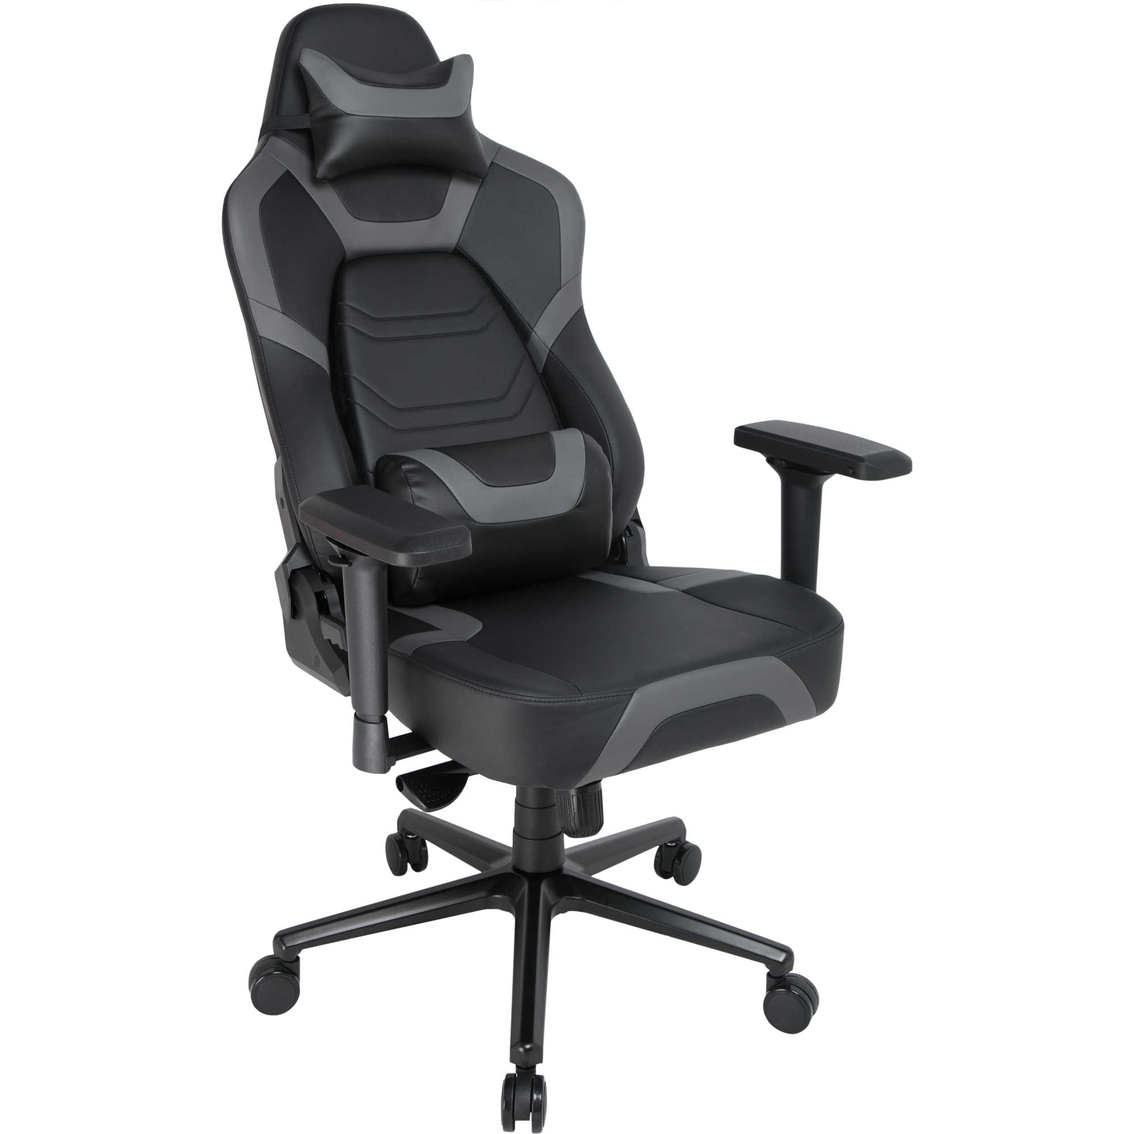 Simply Perfect Big & Tall Ergonomic High Back Gaming Chair - Image 5 of 5